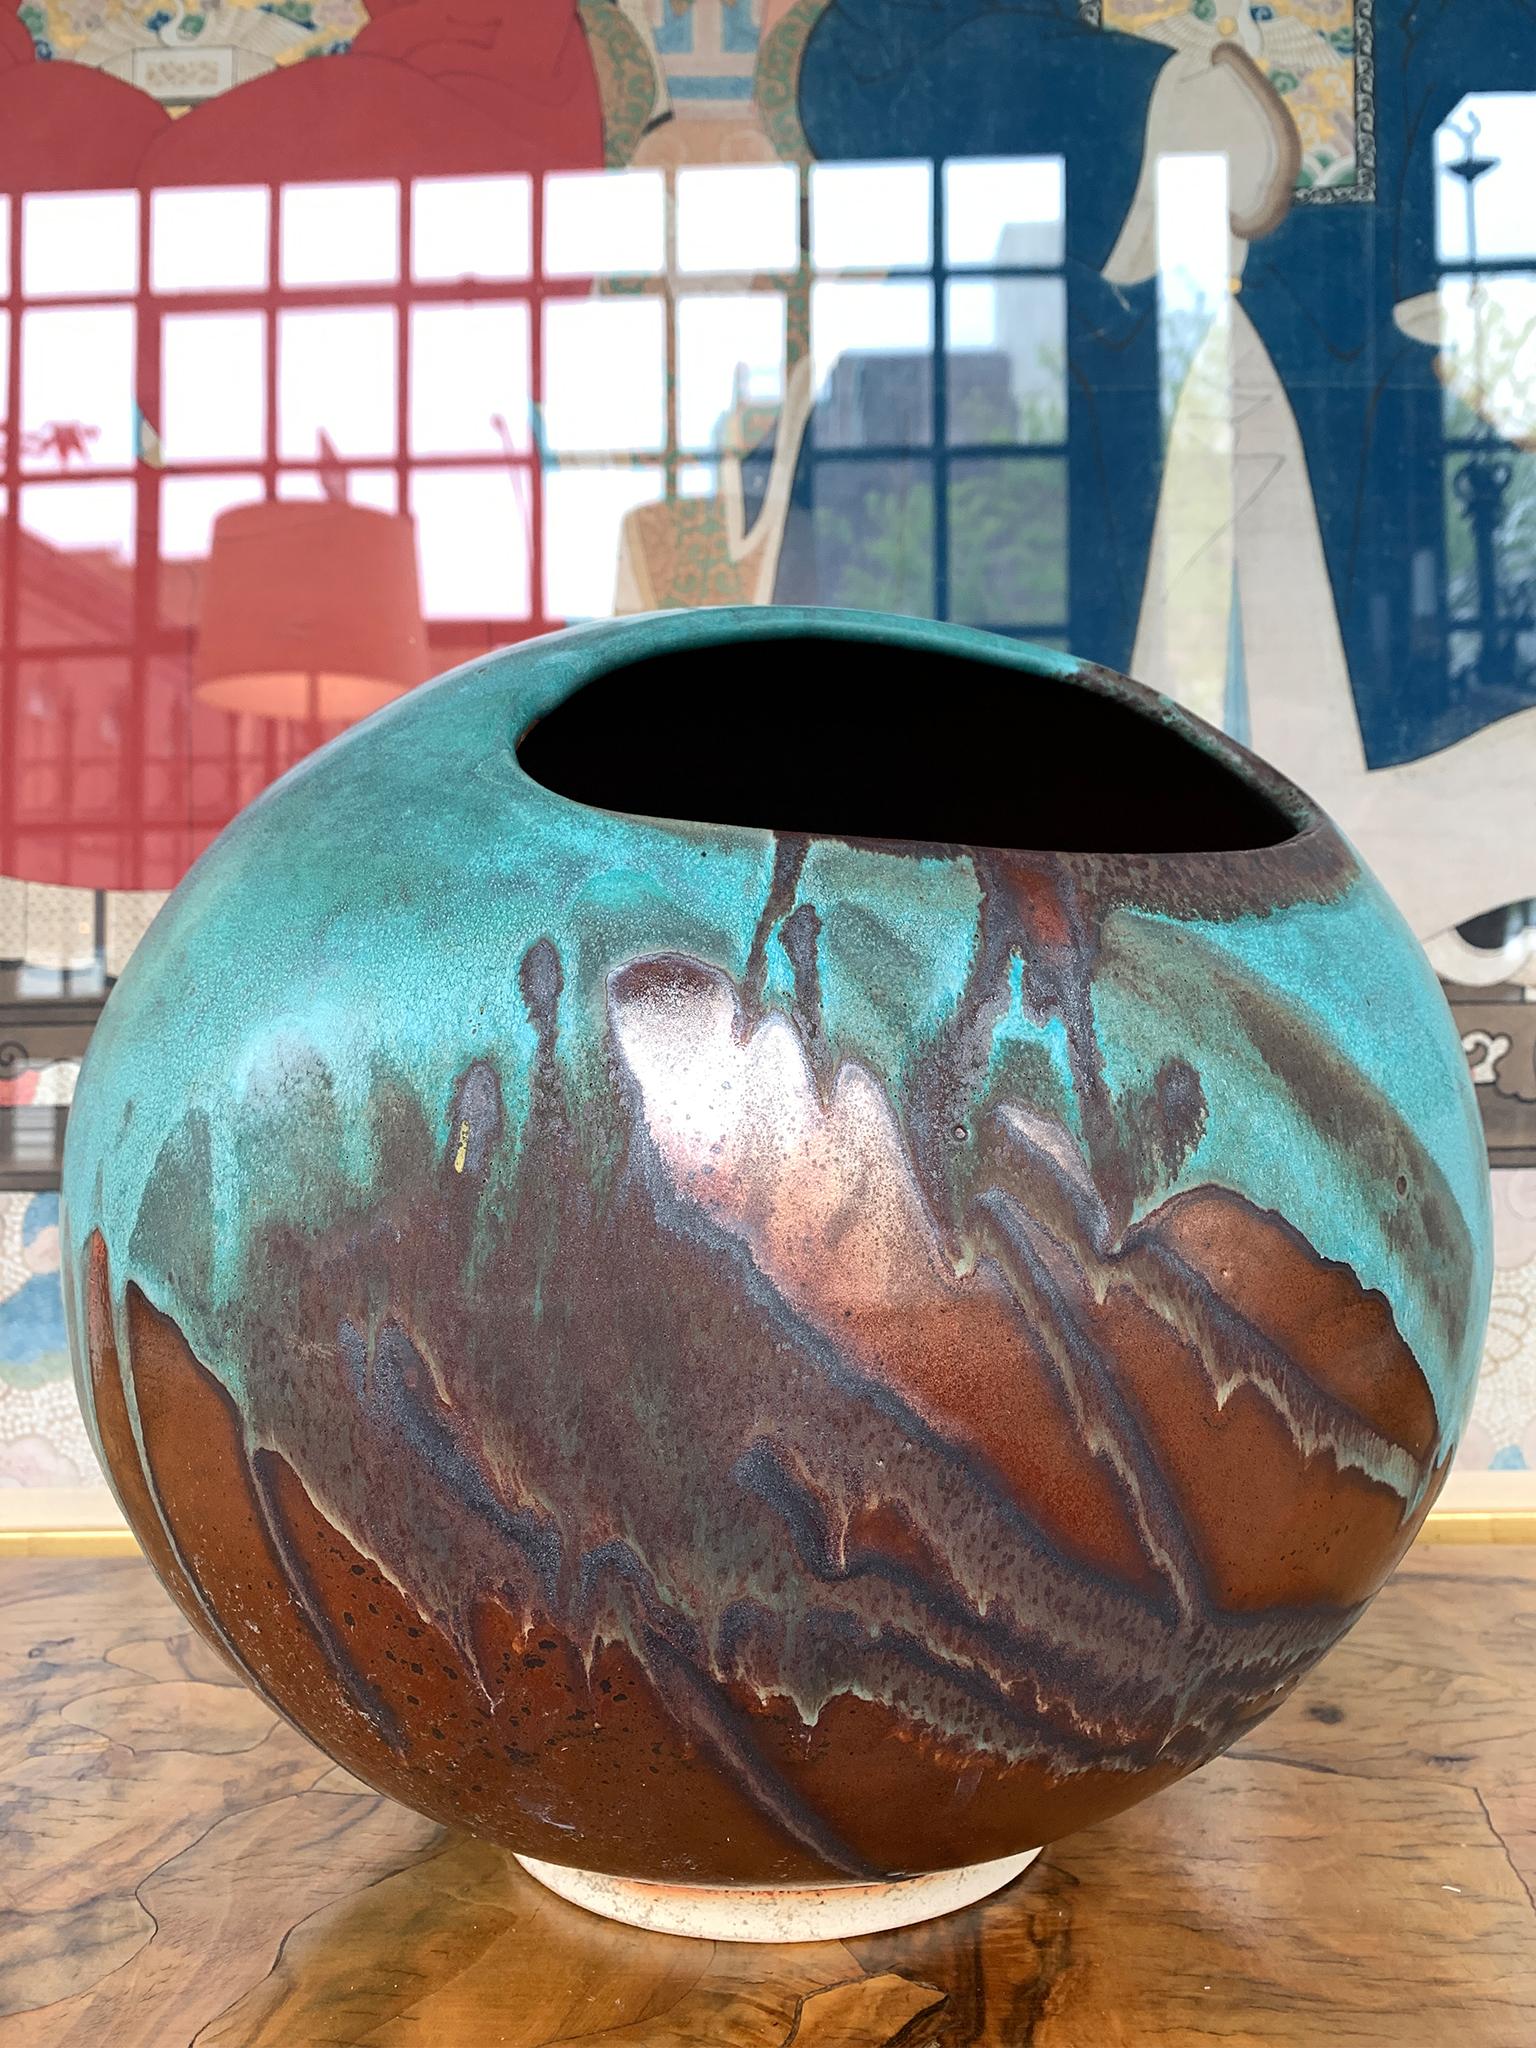 American Thom Lussier Ceramic Vessel #3 - From the Oxidized Copper Collection For Sale